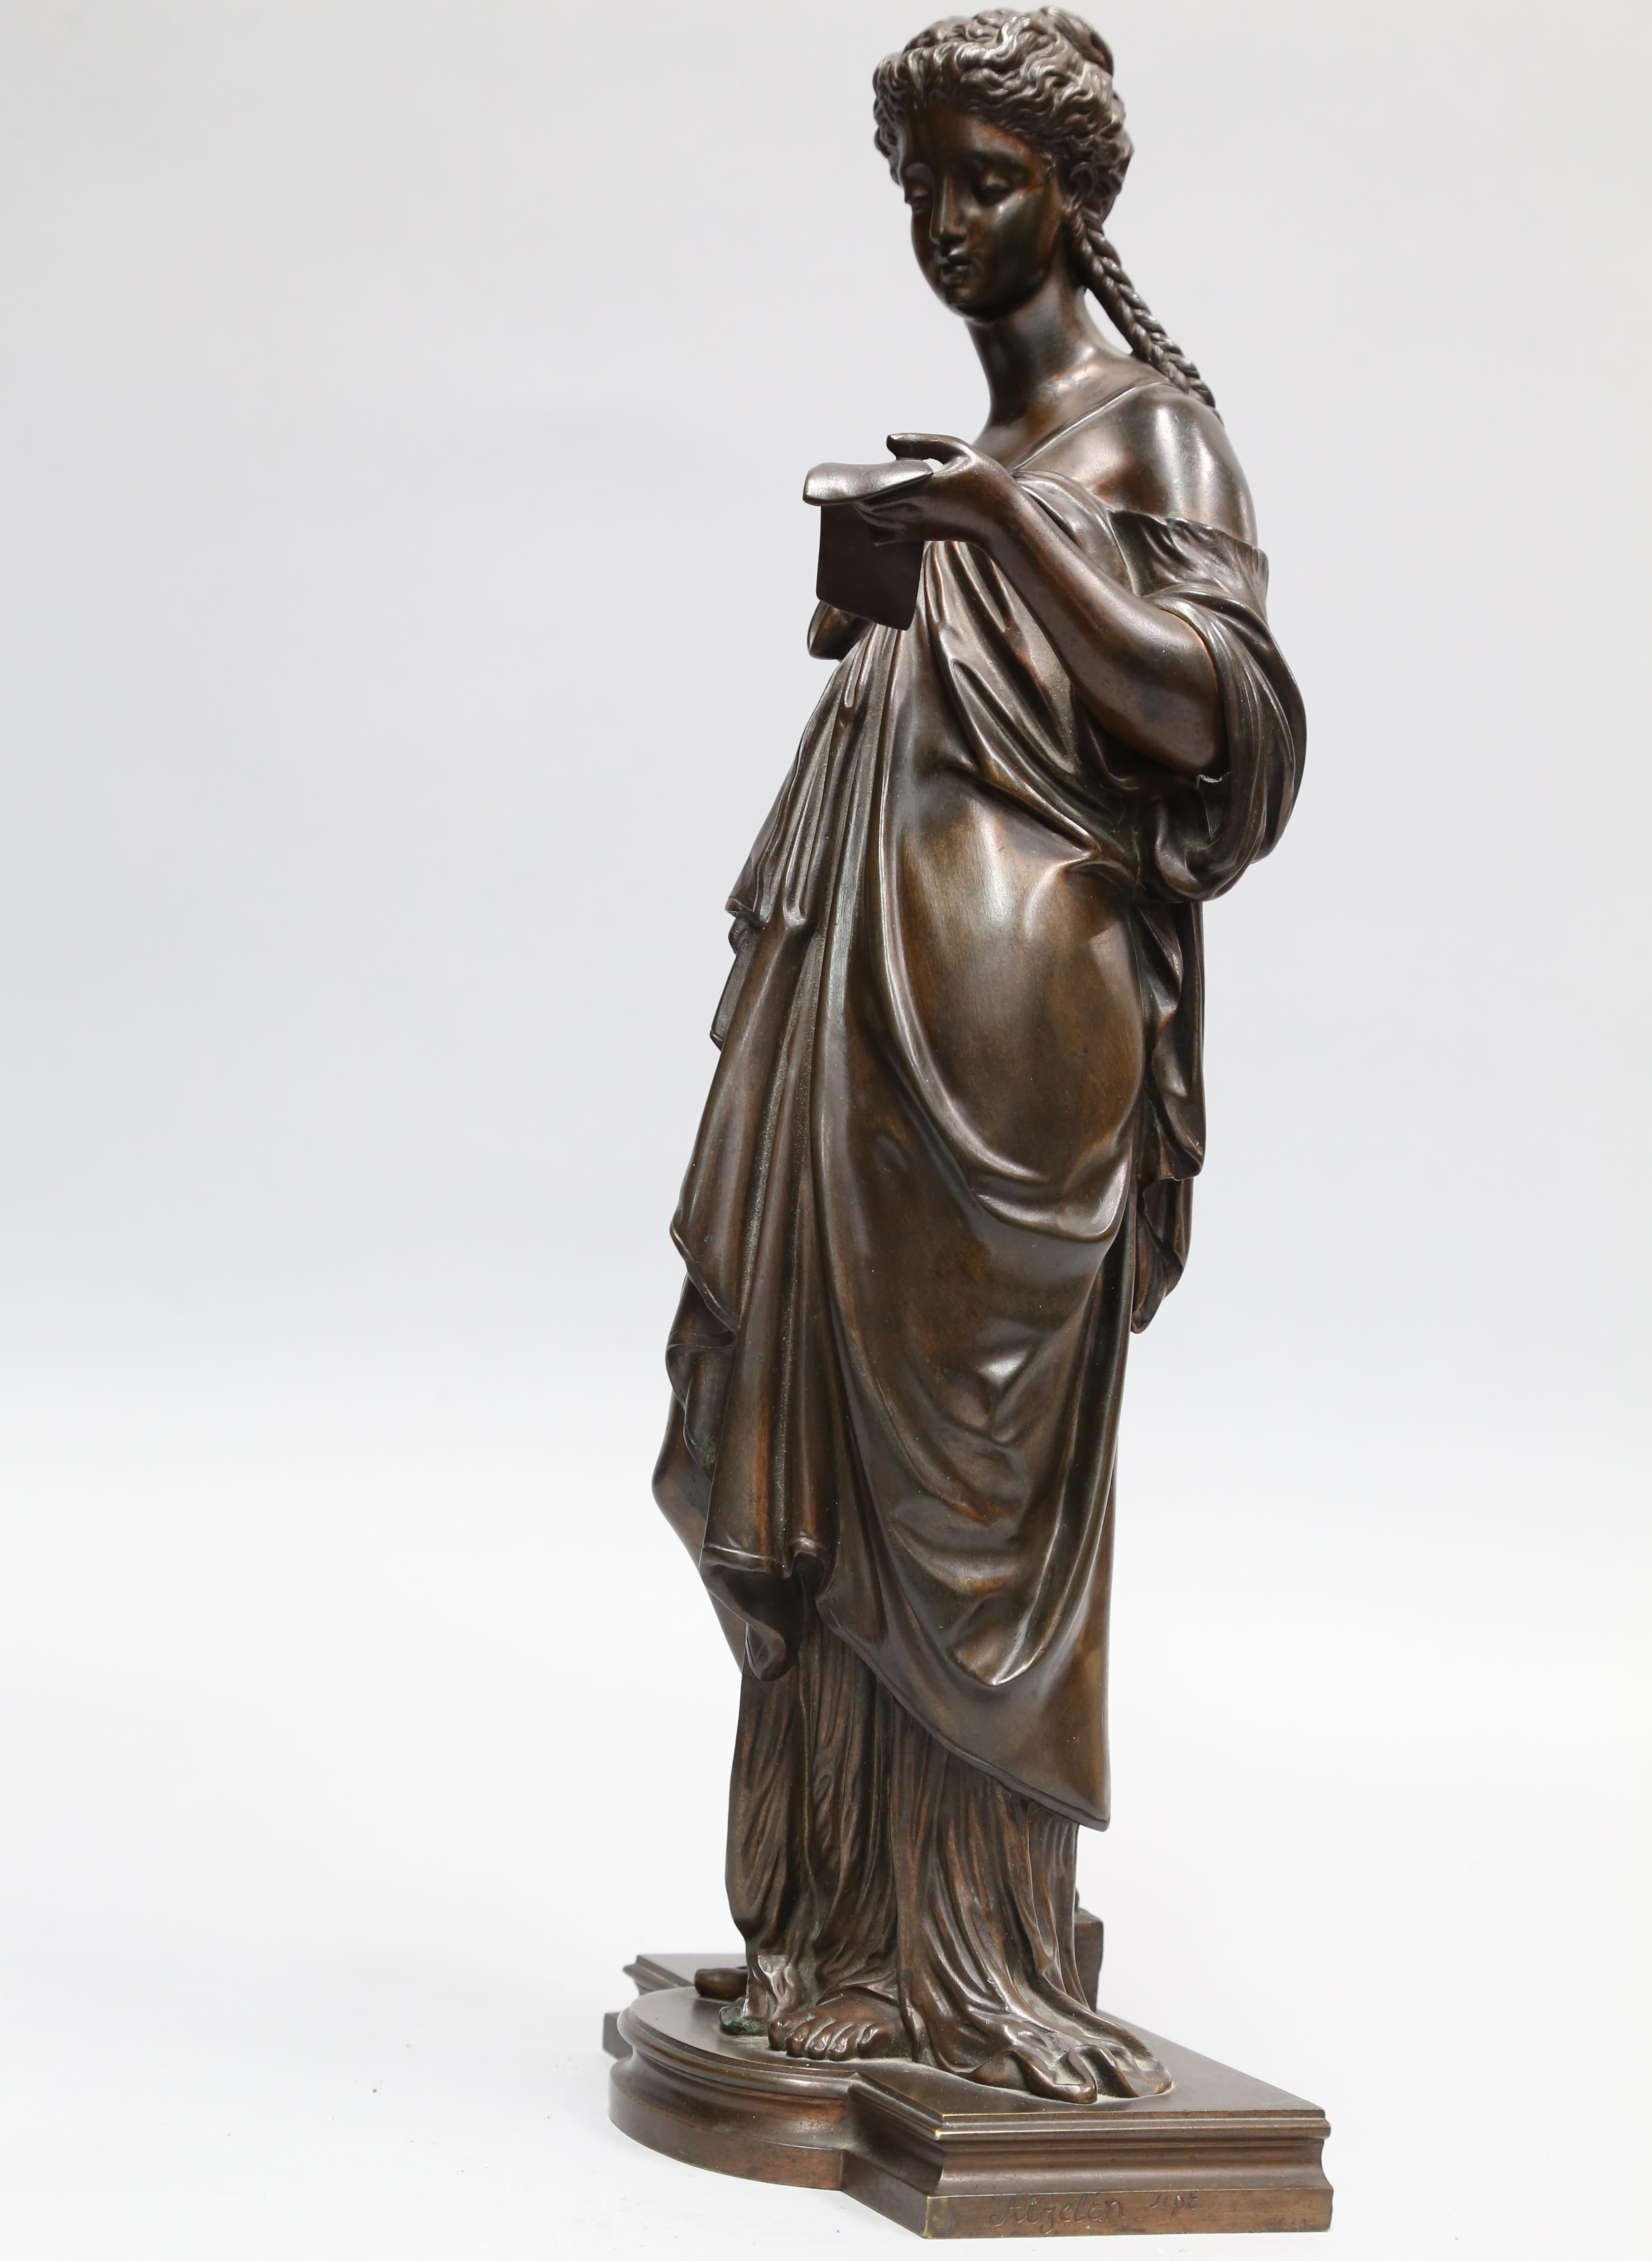 Exquisite bronze sculpture by Eugene Aizelin (French 1821-1902) featuring a strikingly beautiful statue of a female figure standing and reading a letter; set on plinth base. Dimensions: 16.5